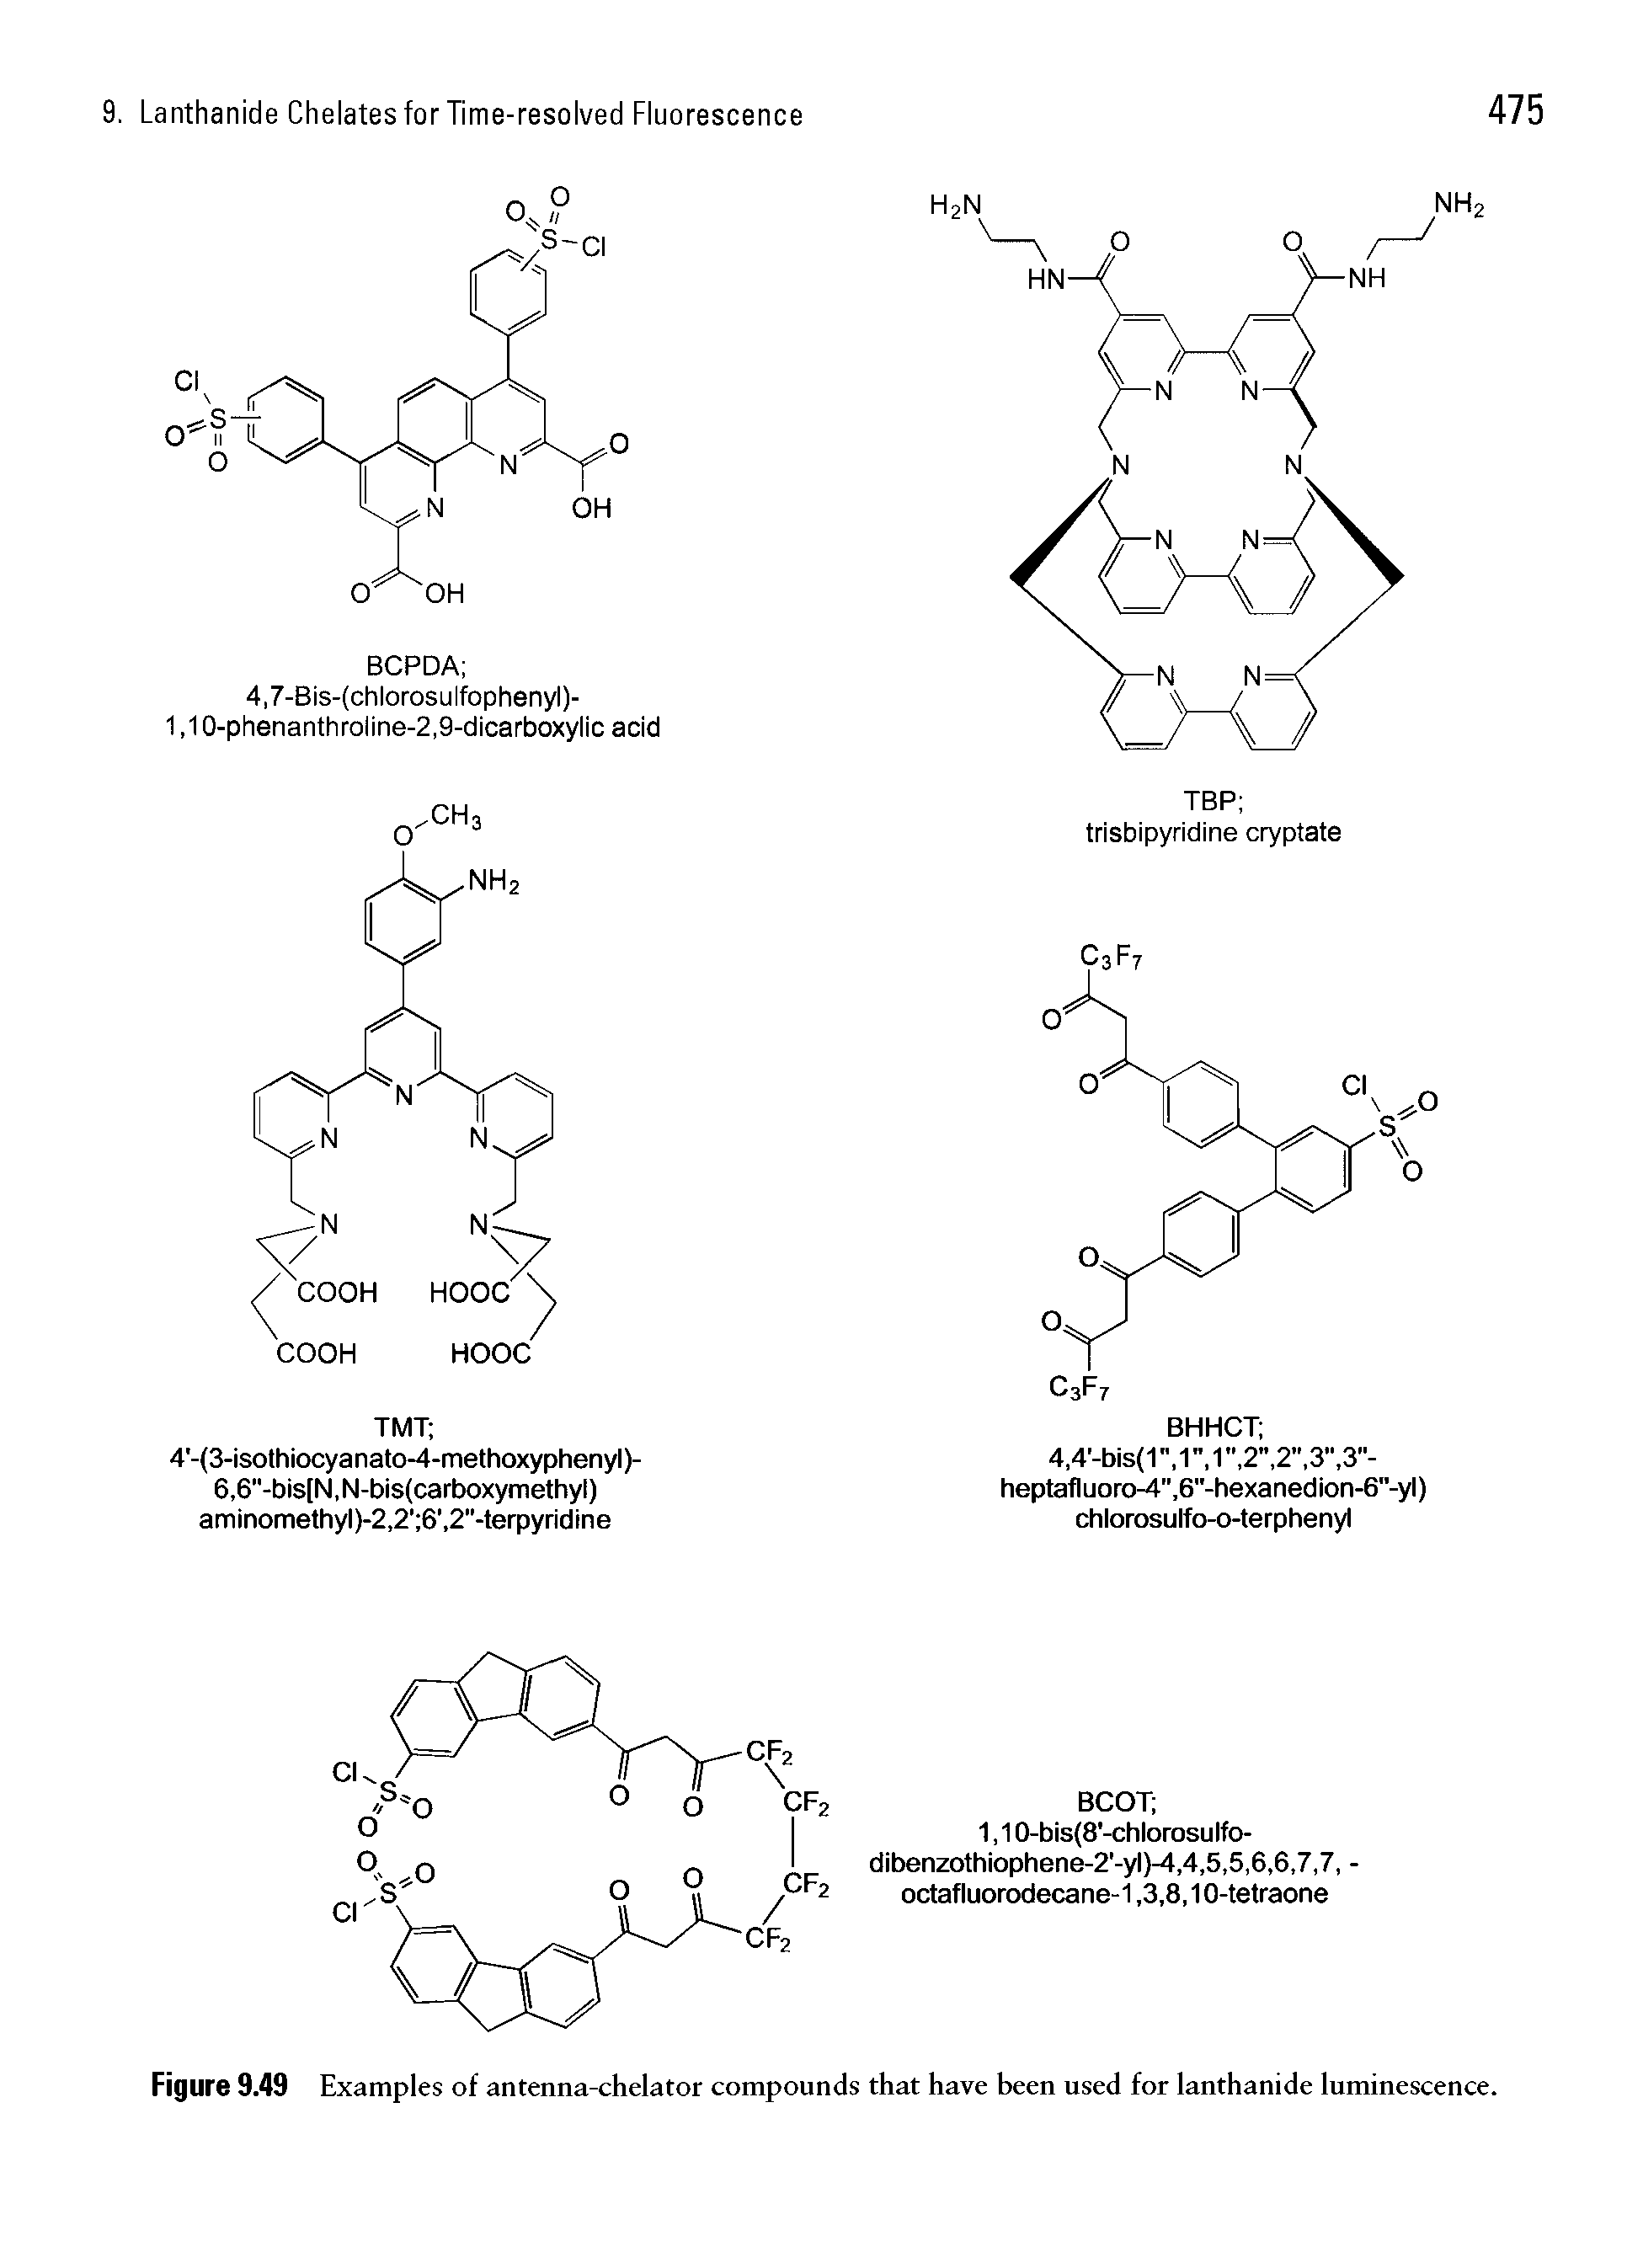 Figure 9.49 Examples of antenna-chelator compounds that have been used for lanthanide luminescence.